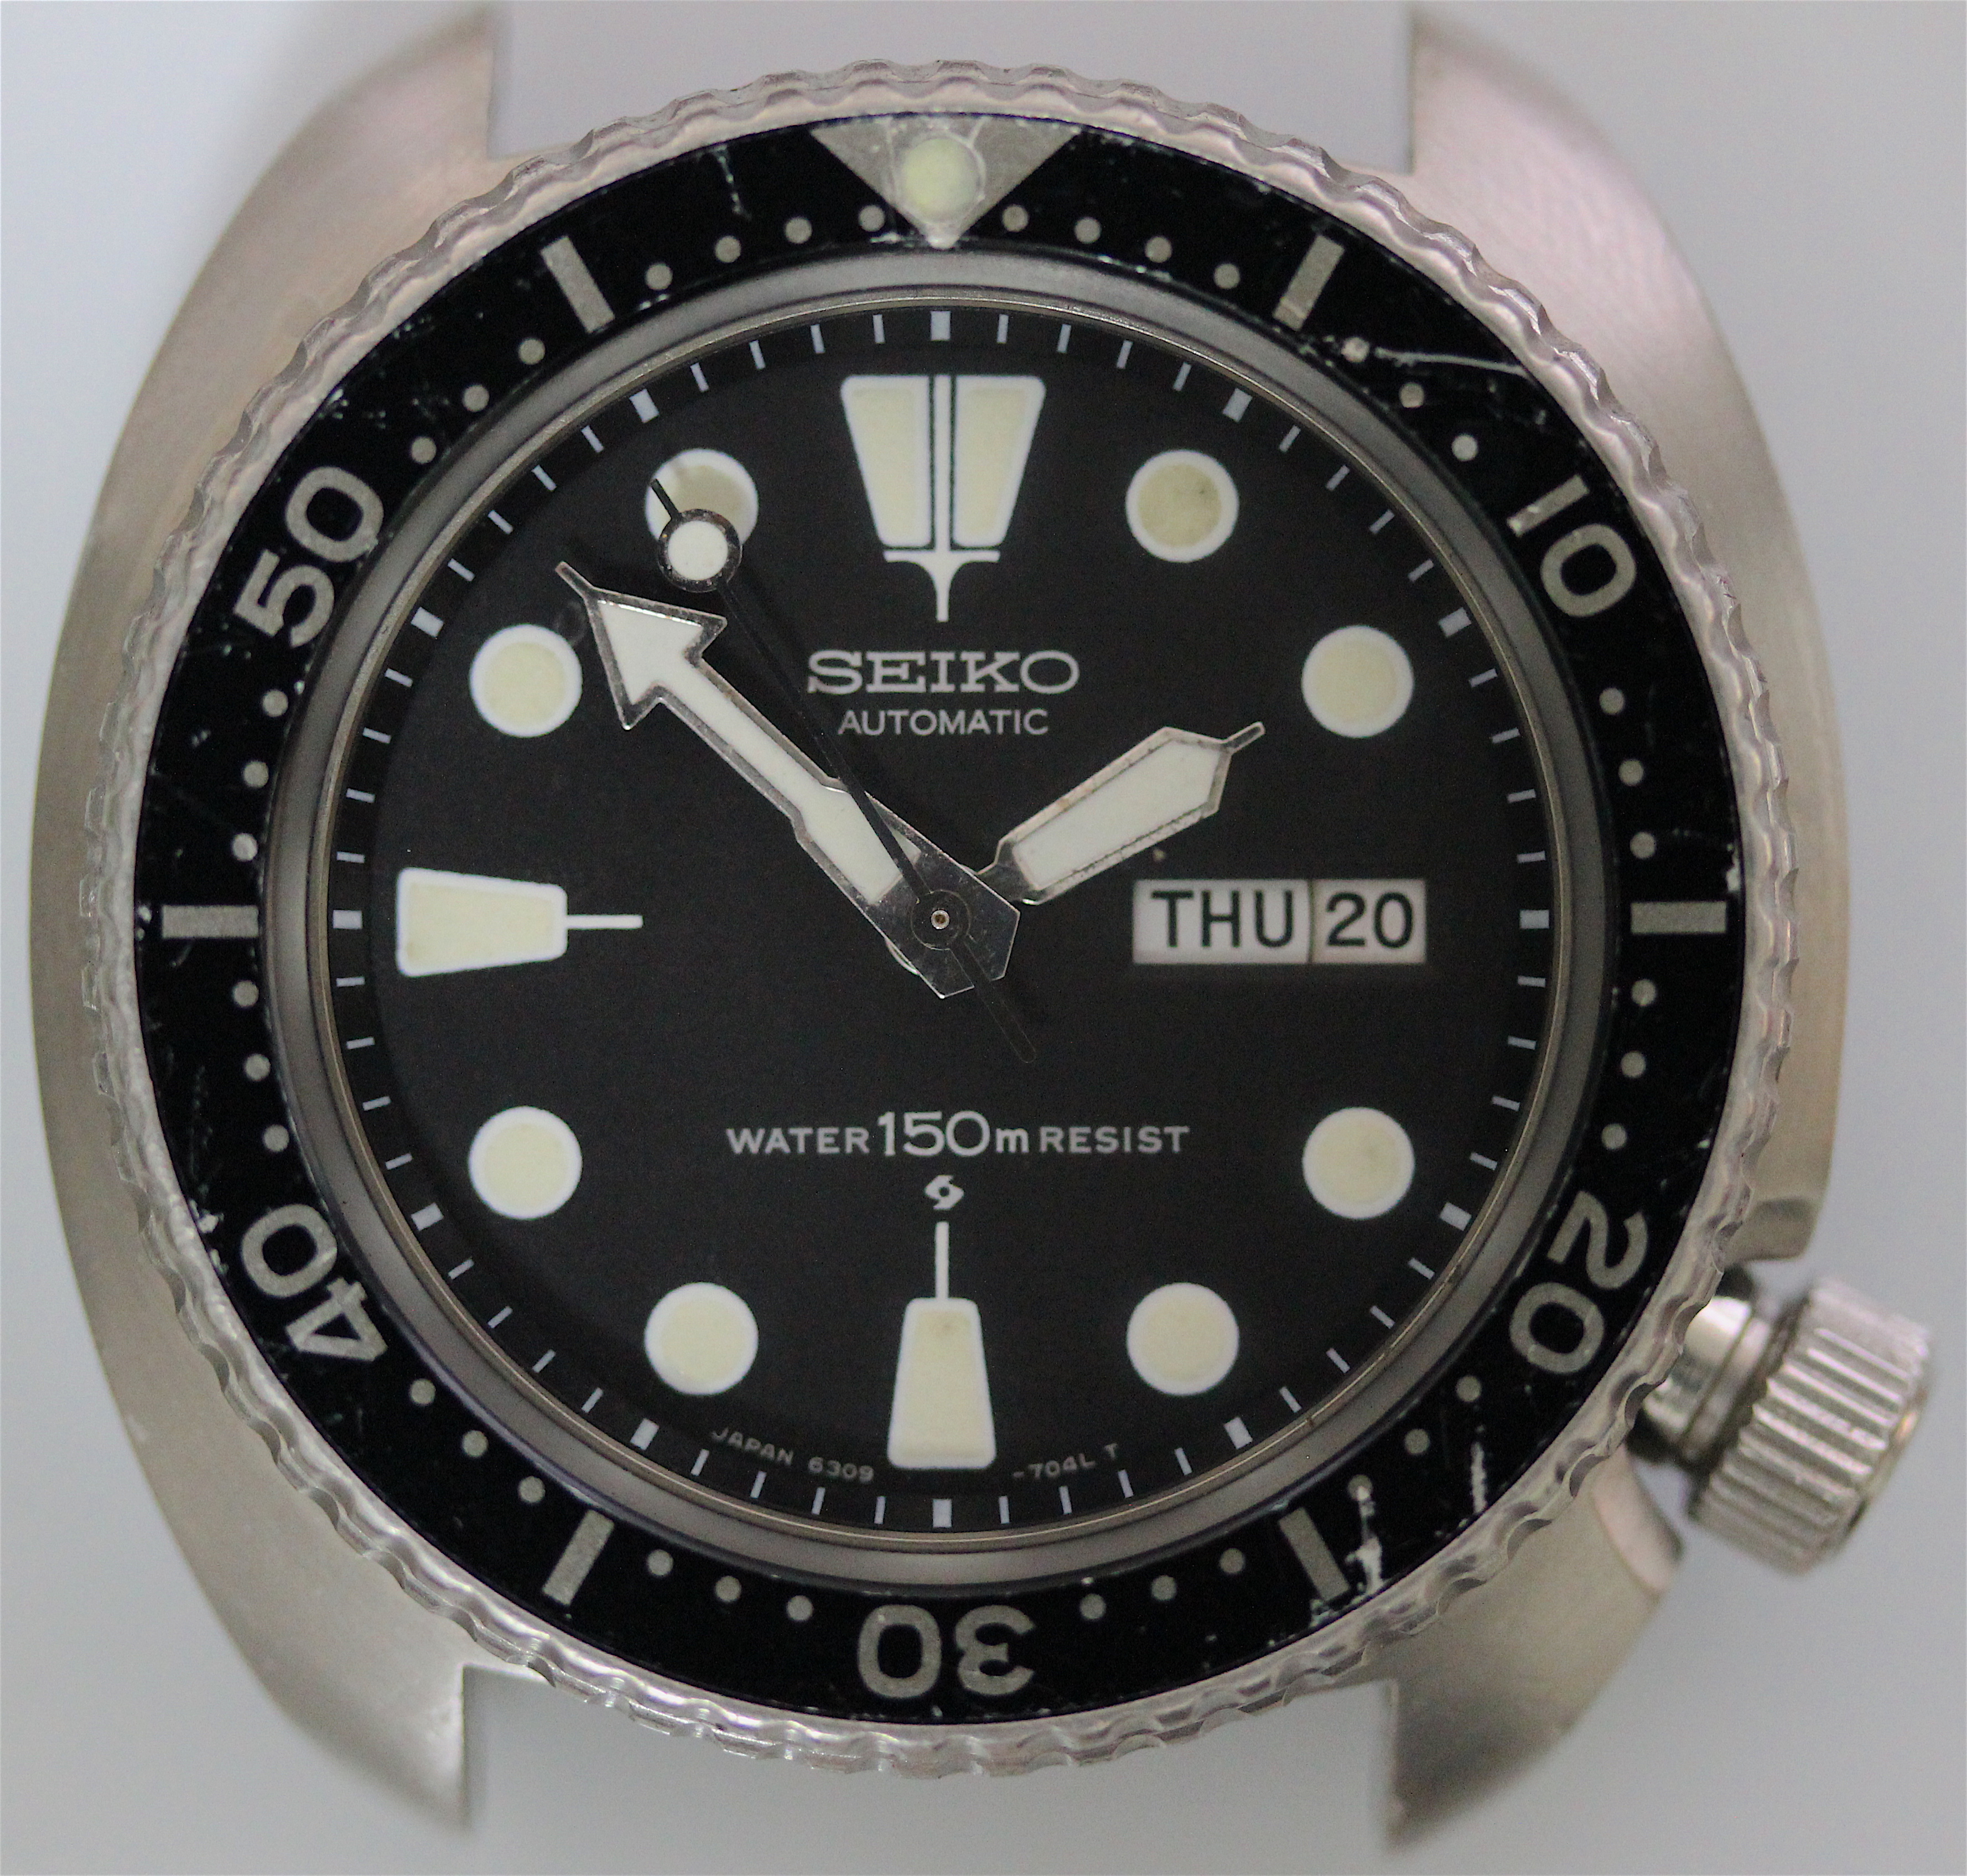 On My Bench - Seiko 6309-7040 | Omega Forums